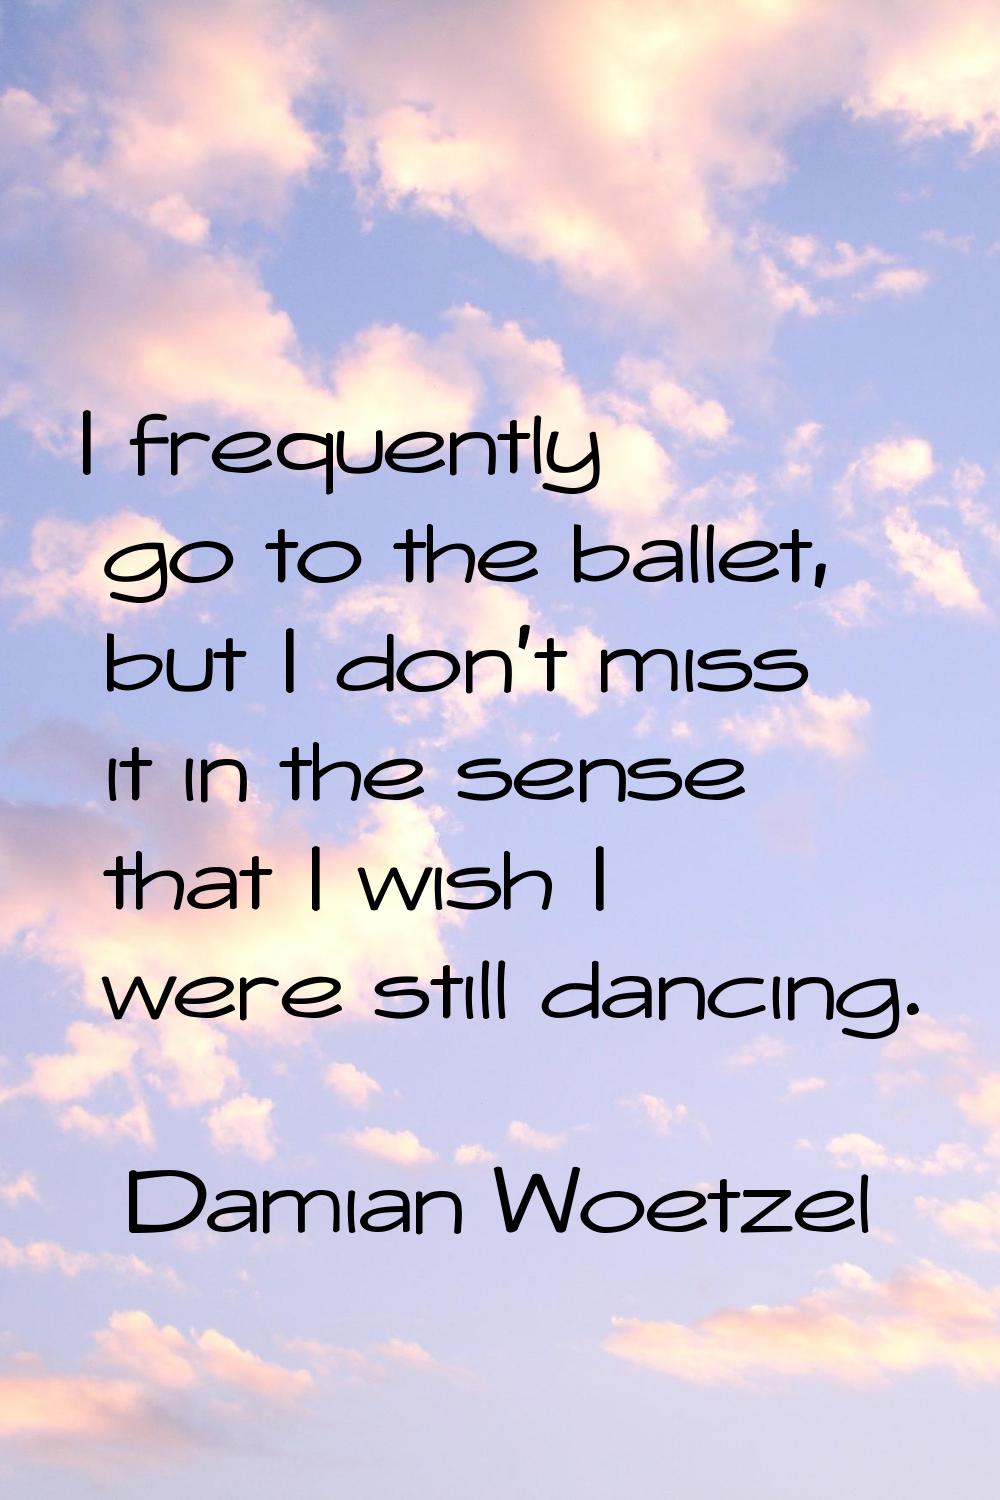 I frequently go to the ballet, but I don't miss it in the sense that I wish I were still dancing.